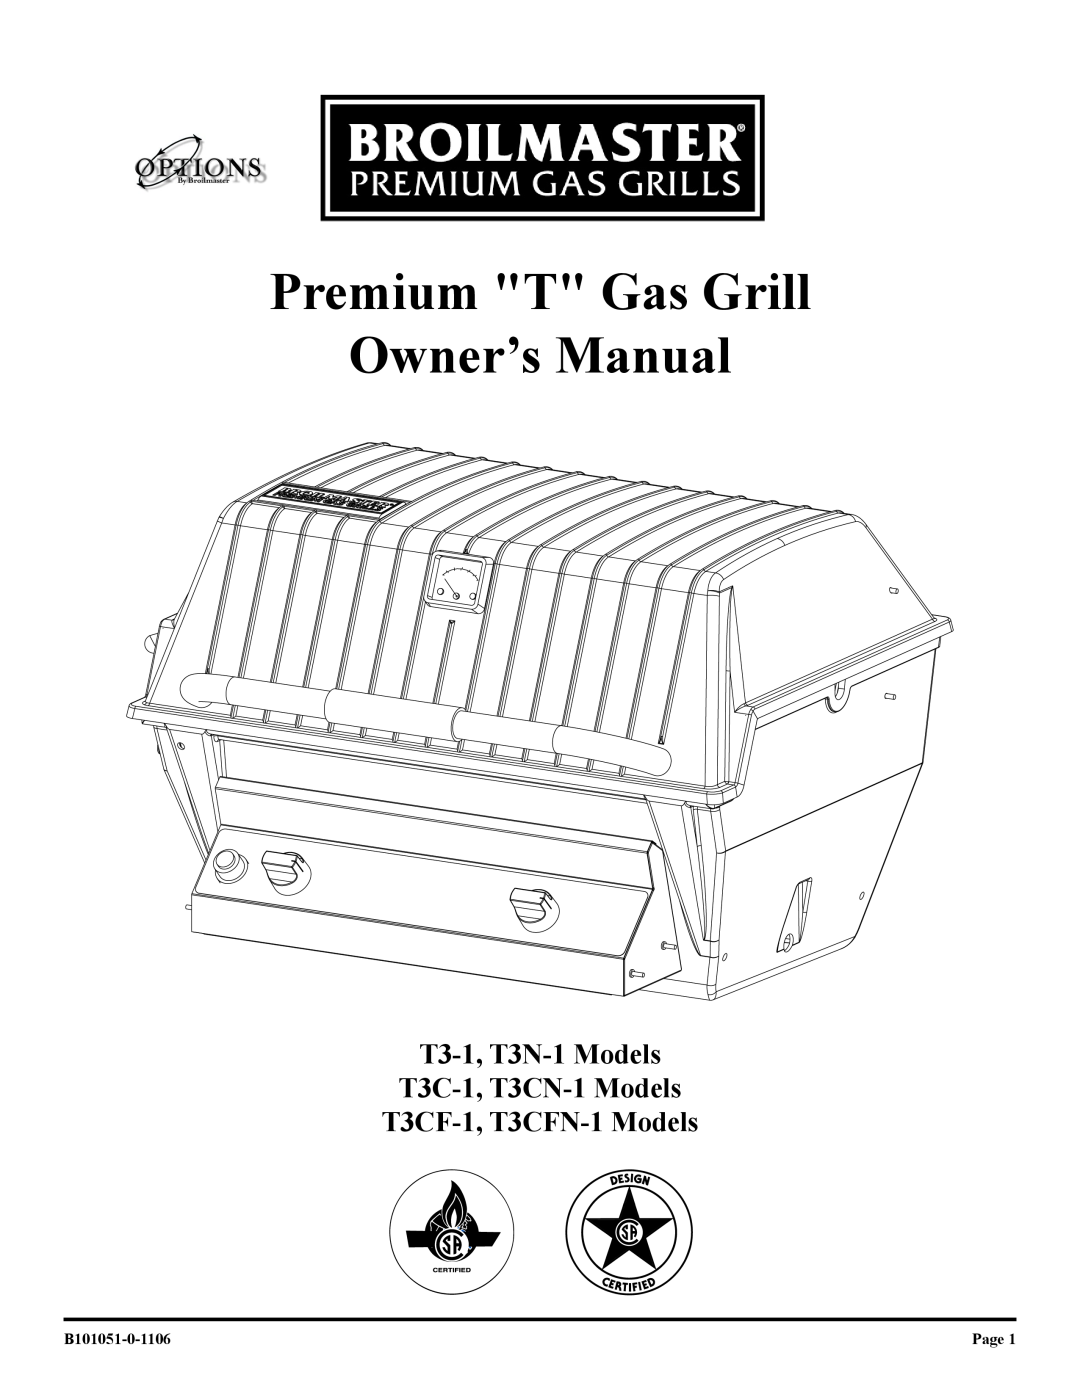 Broilmaster T3CN-1 T3CF-1, T3CFN-1, T3N-1 T3C-1, T3-1 owner manual Premium T Gas Grill Owner’s Manual, B101051-0-1106, Page 